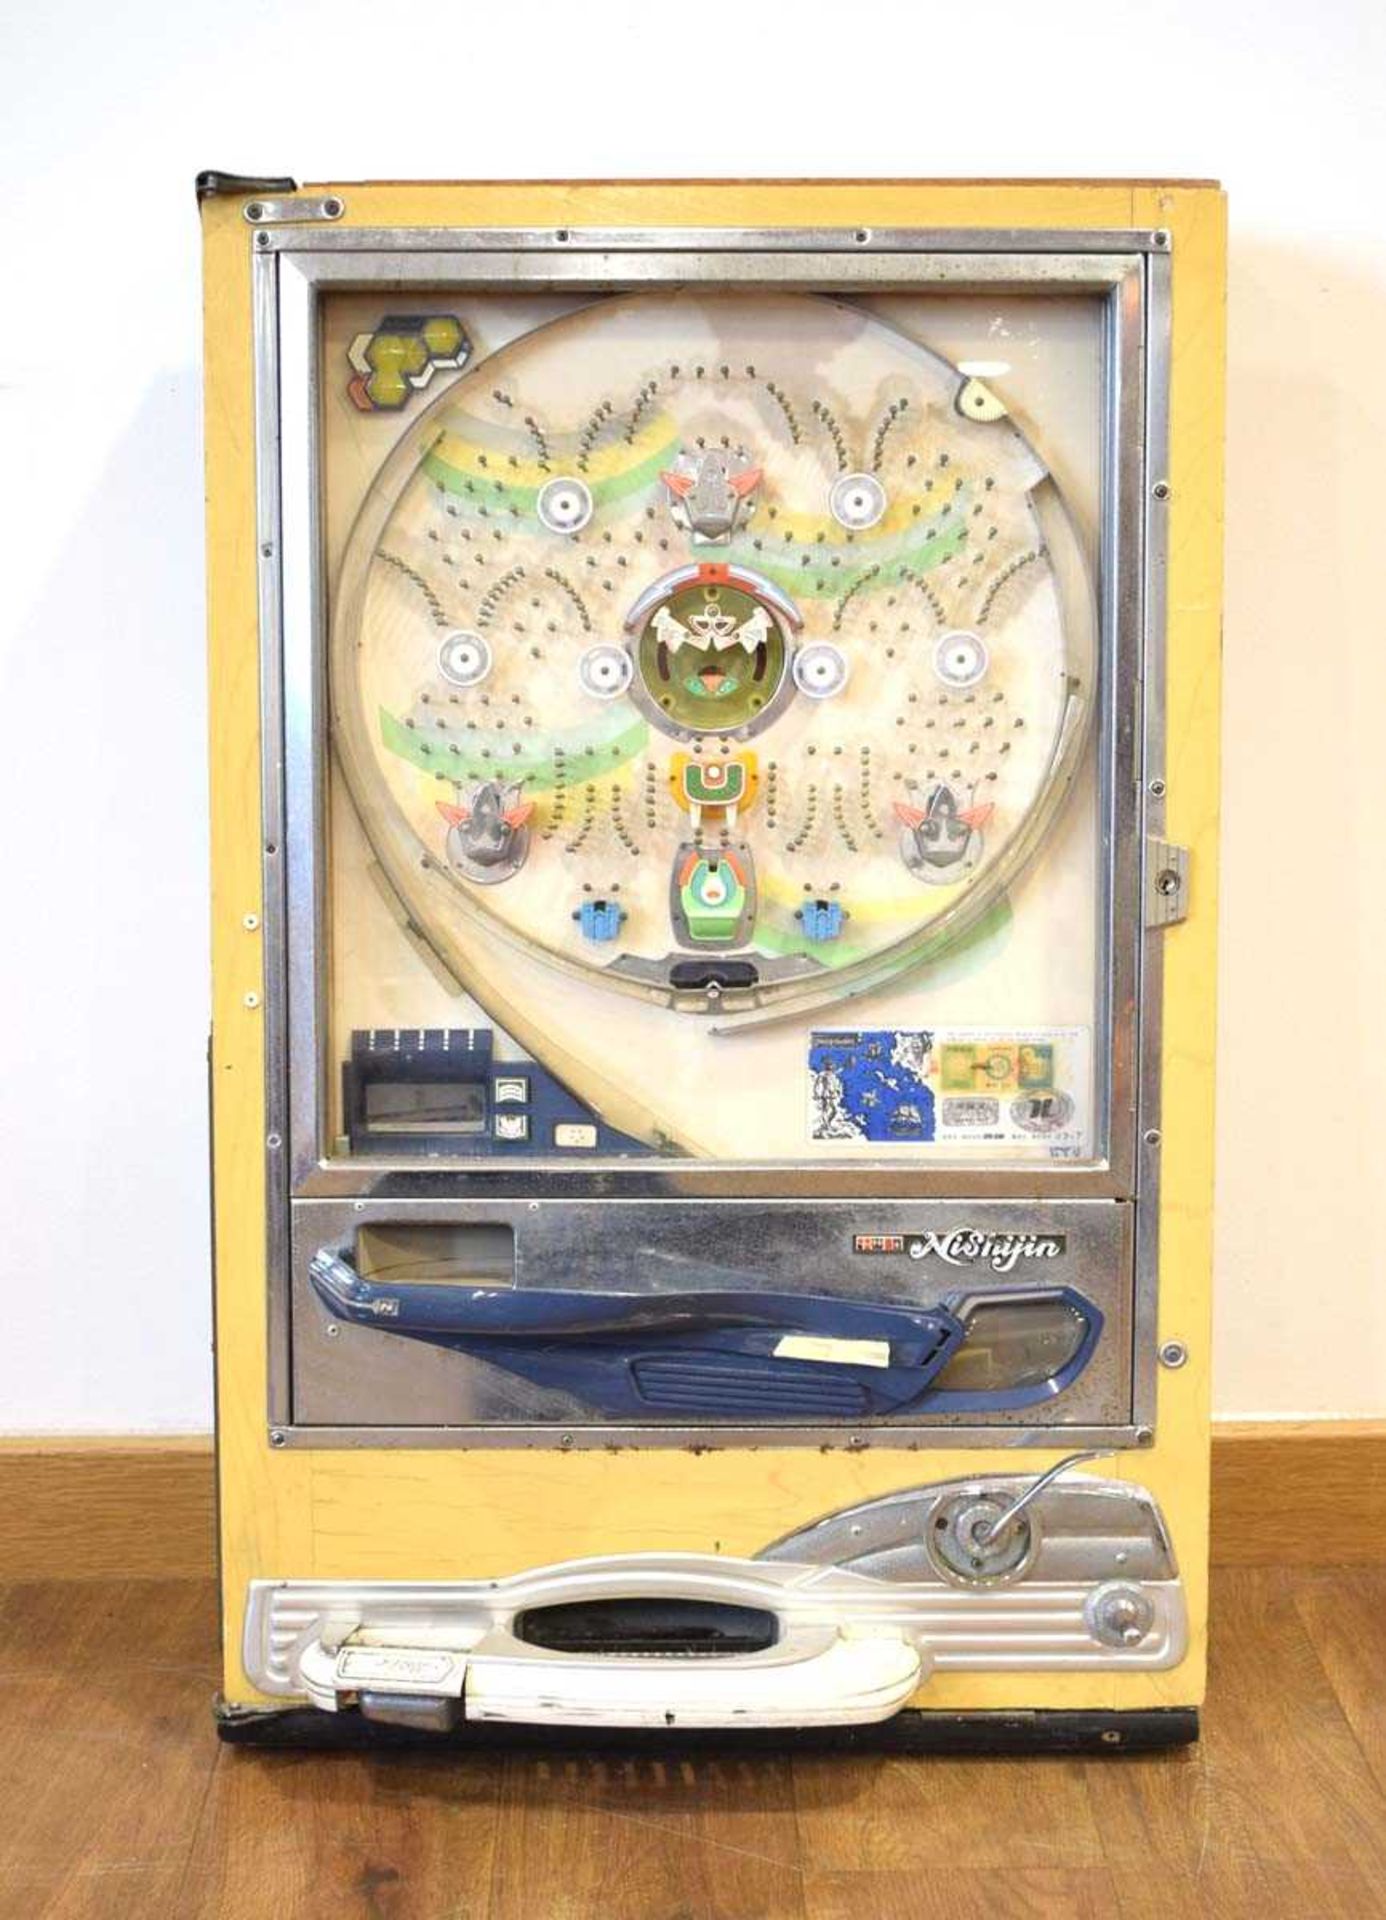 A Japanese Pachinko pin-ball games machine, 83 x 52 cm The working order is unknown and there is